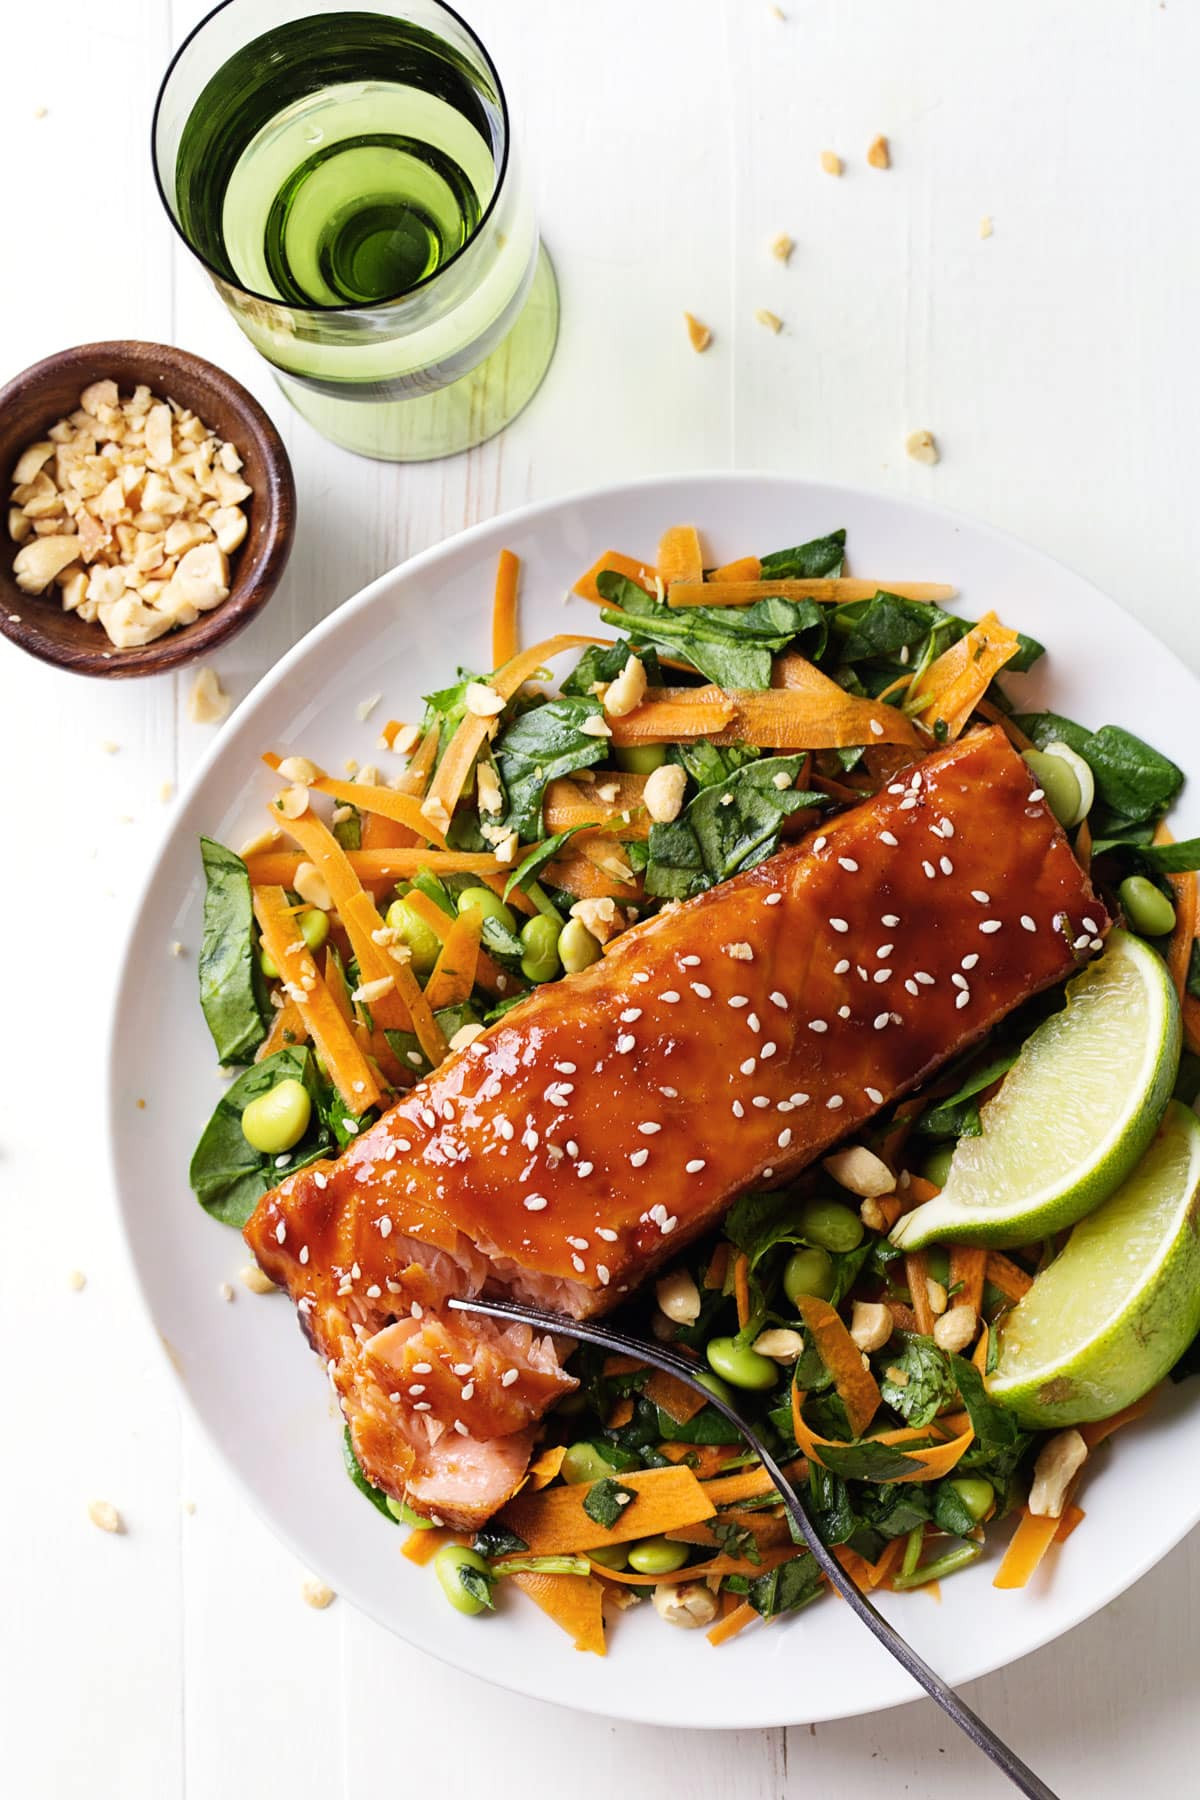 Healthy Salmon Recipes For Weight Loss
 Simple Hoisin Glazed Salmon Recipe Pinch of Yum